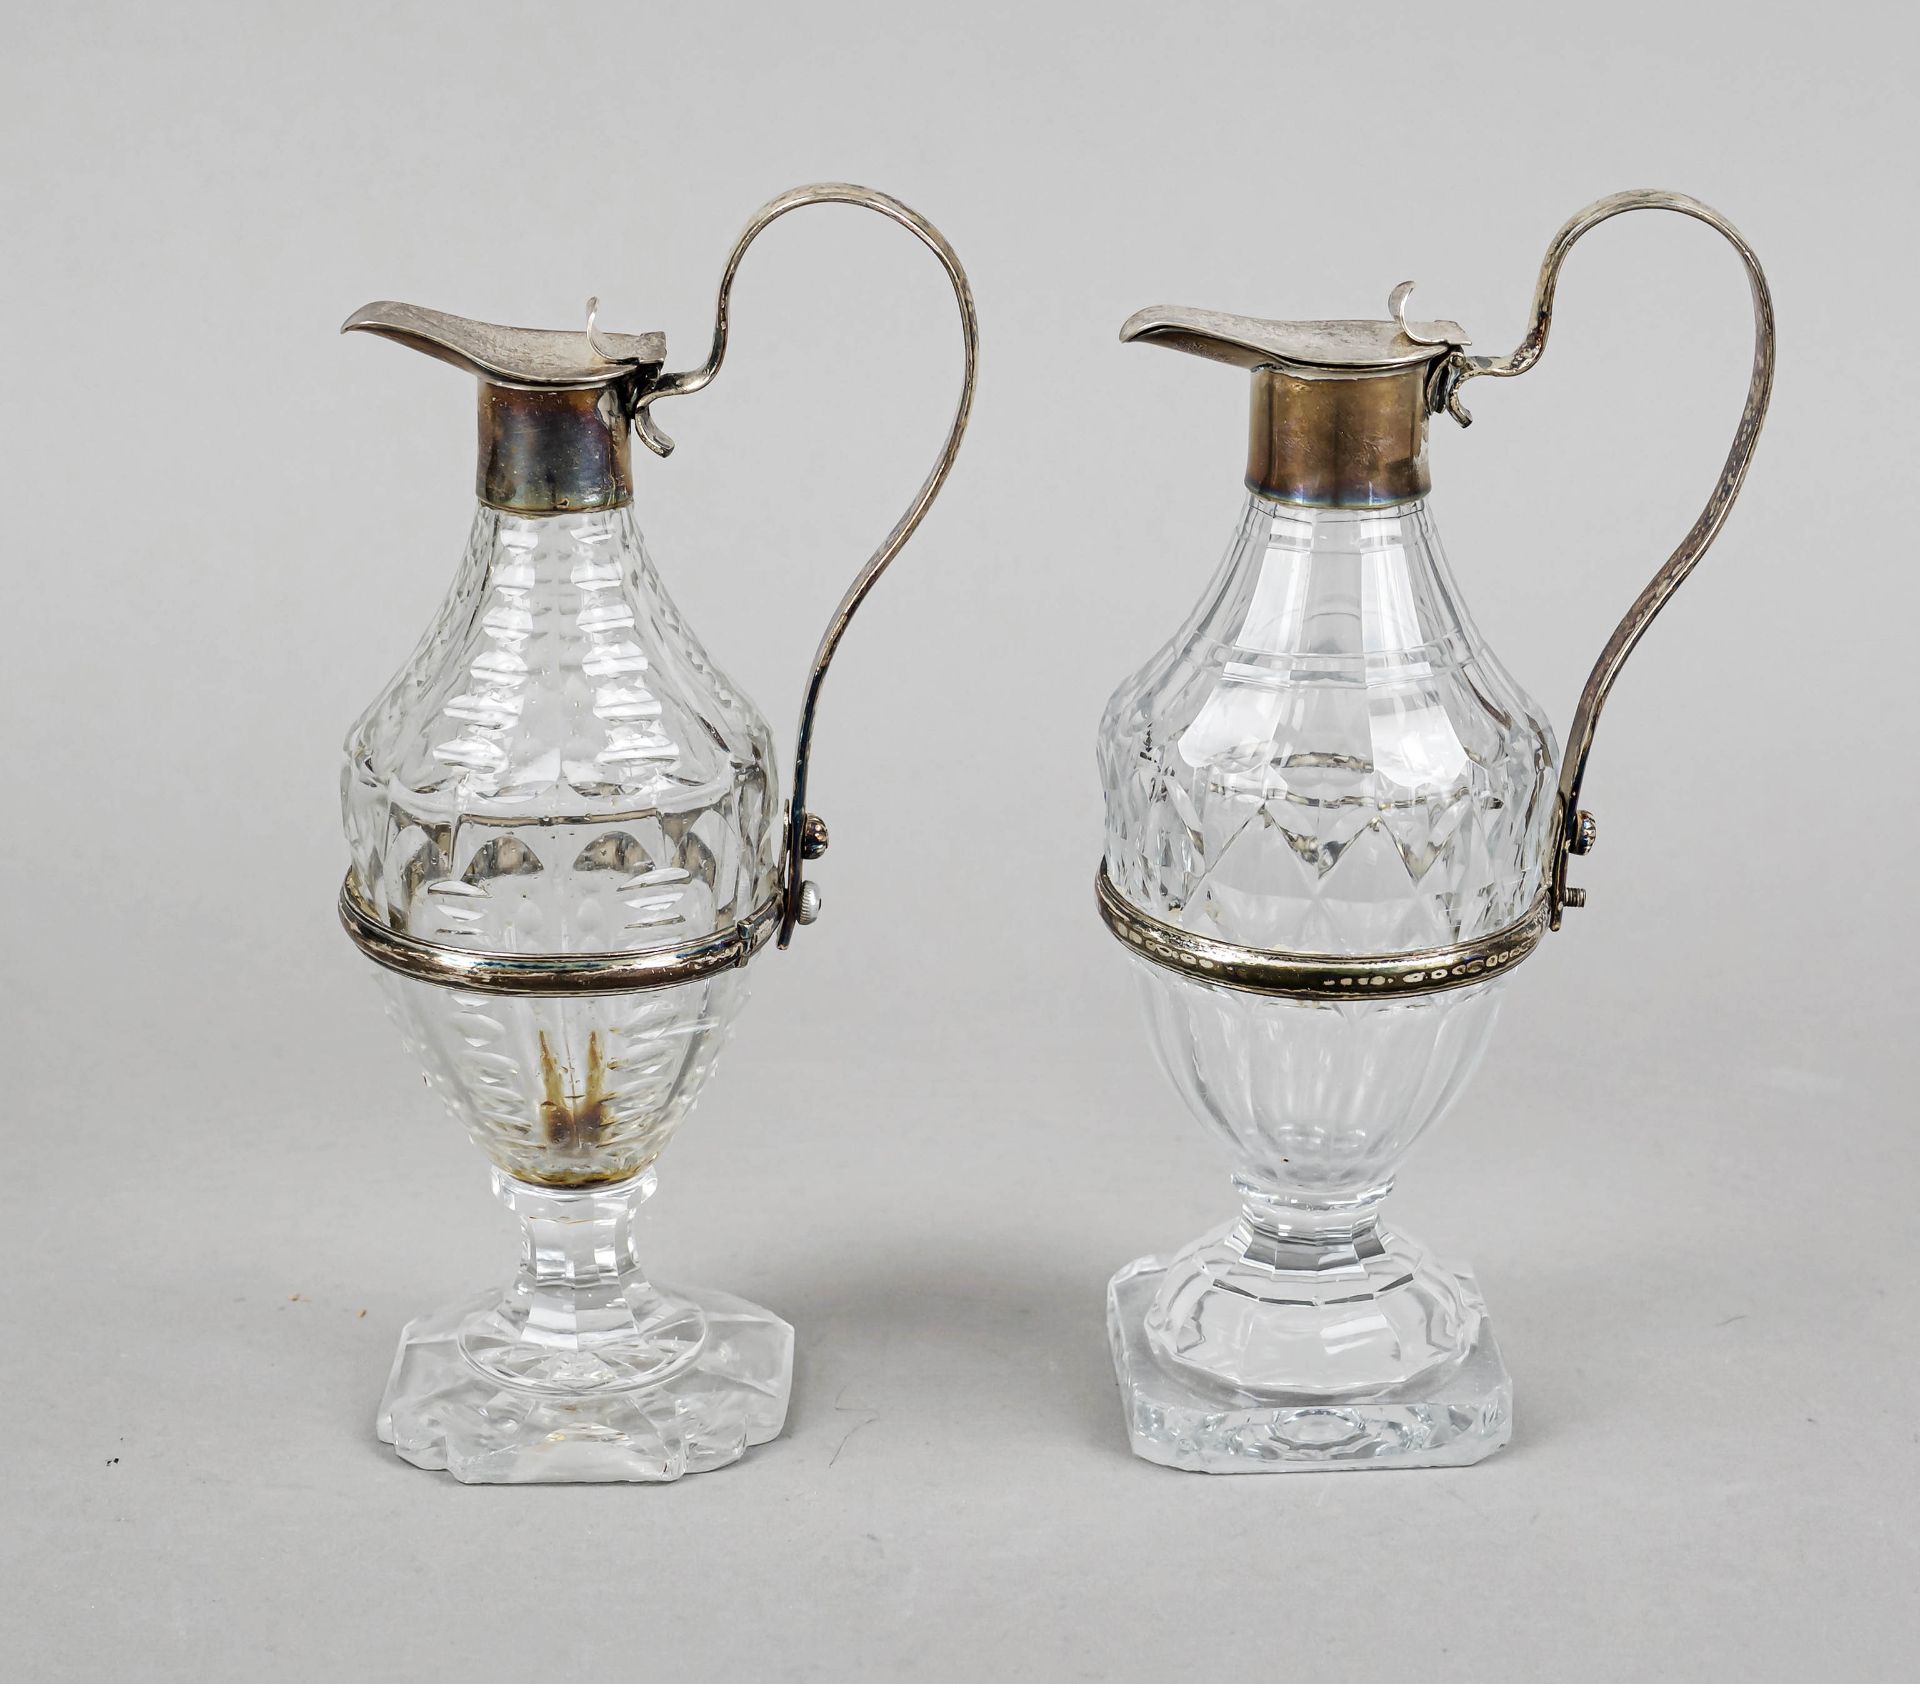 Two lemon jugs with silver mounting, early 20th century, silver tested or sterling silver 925/000,